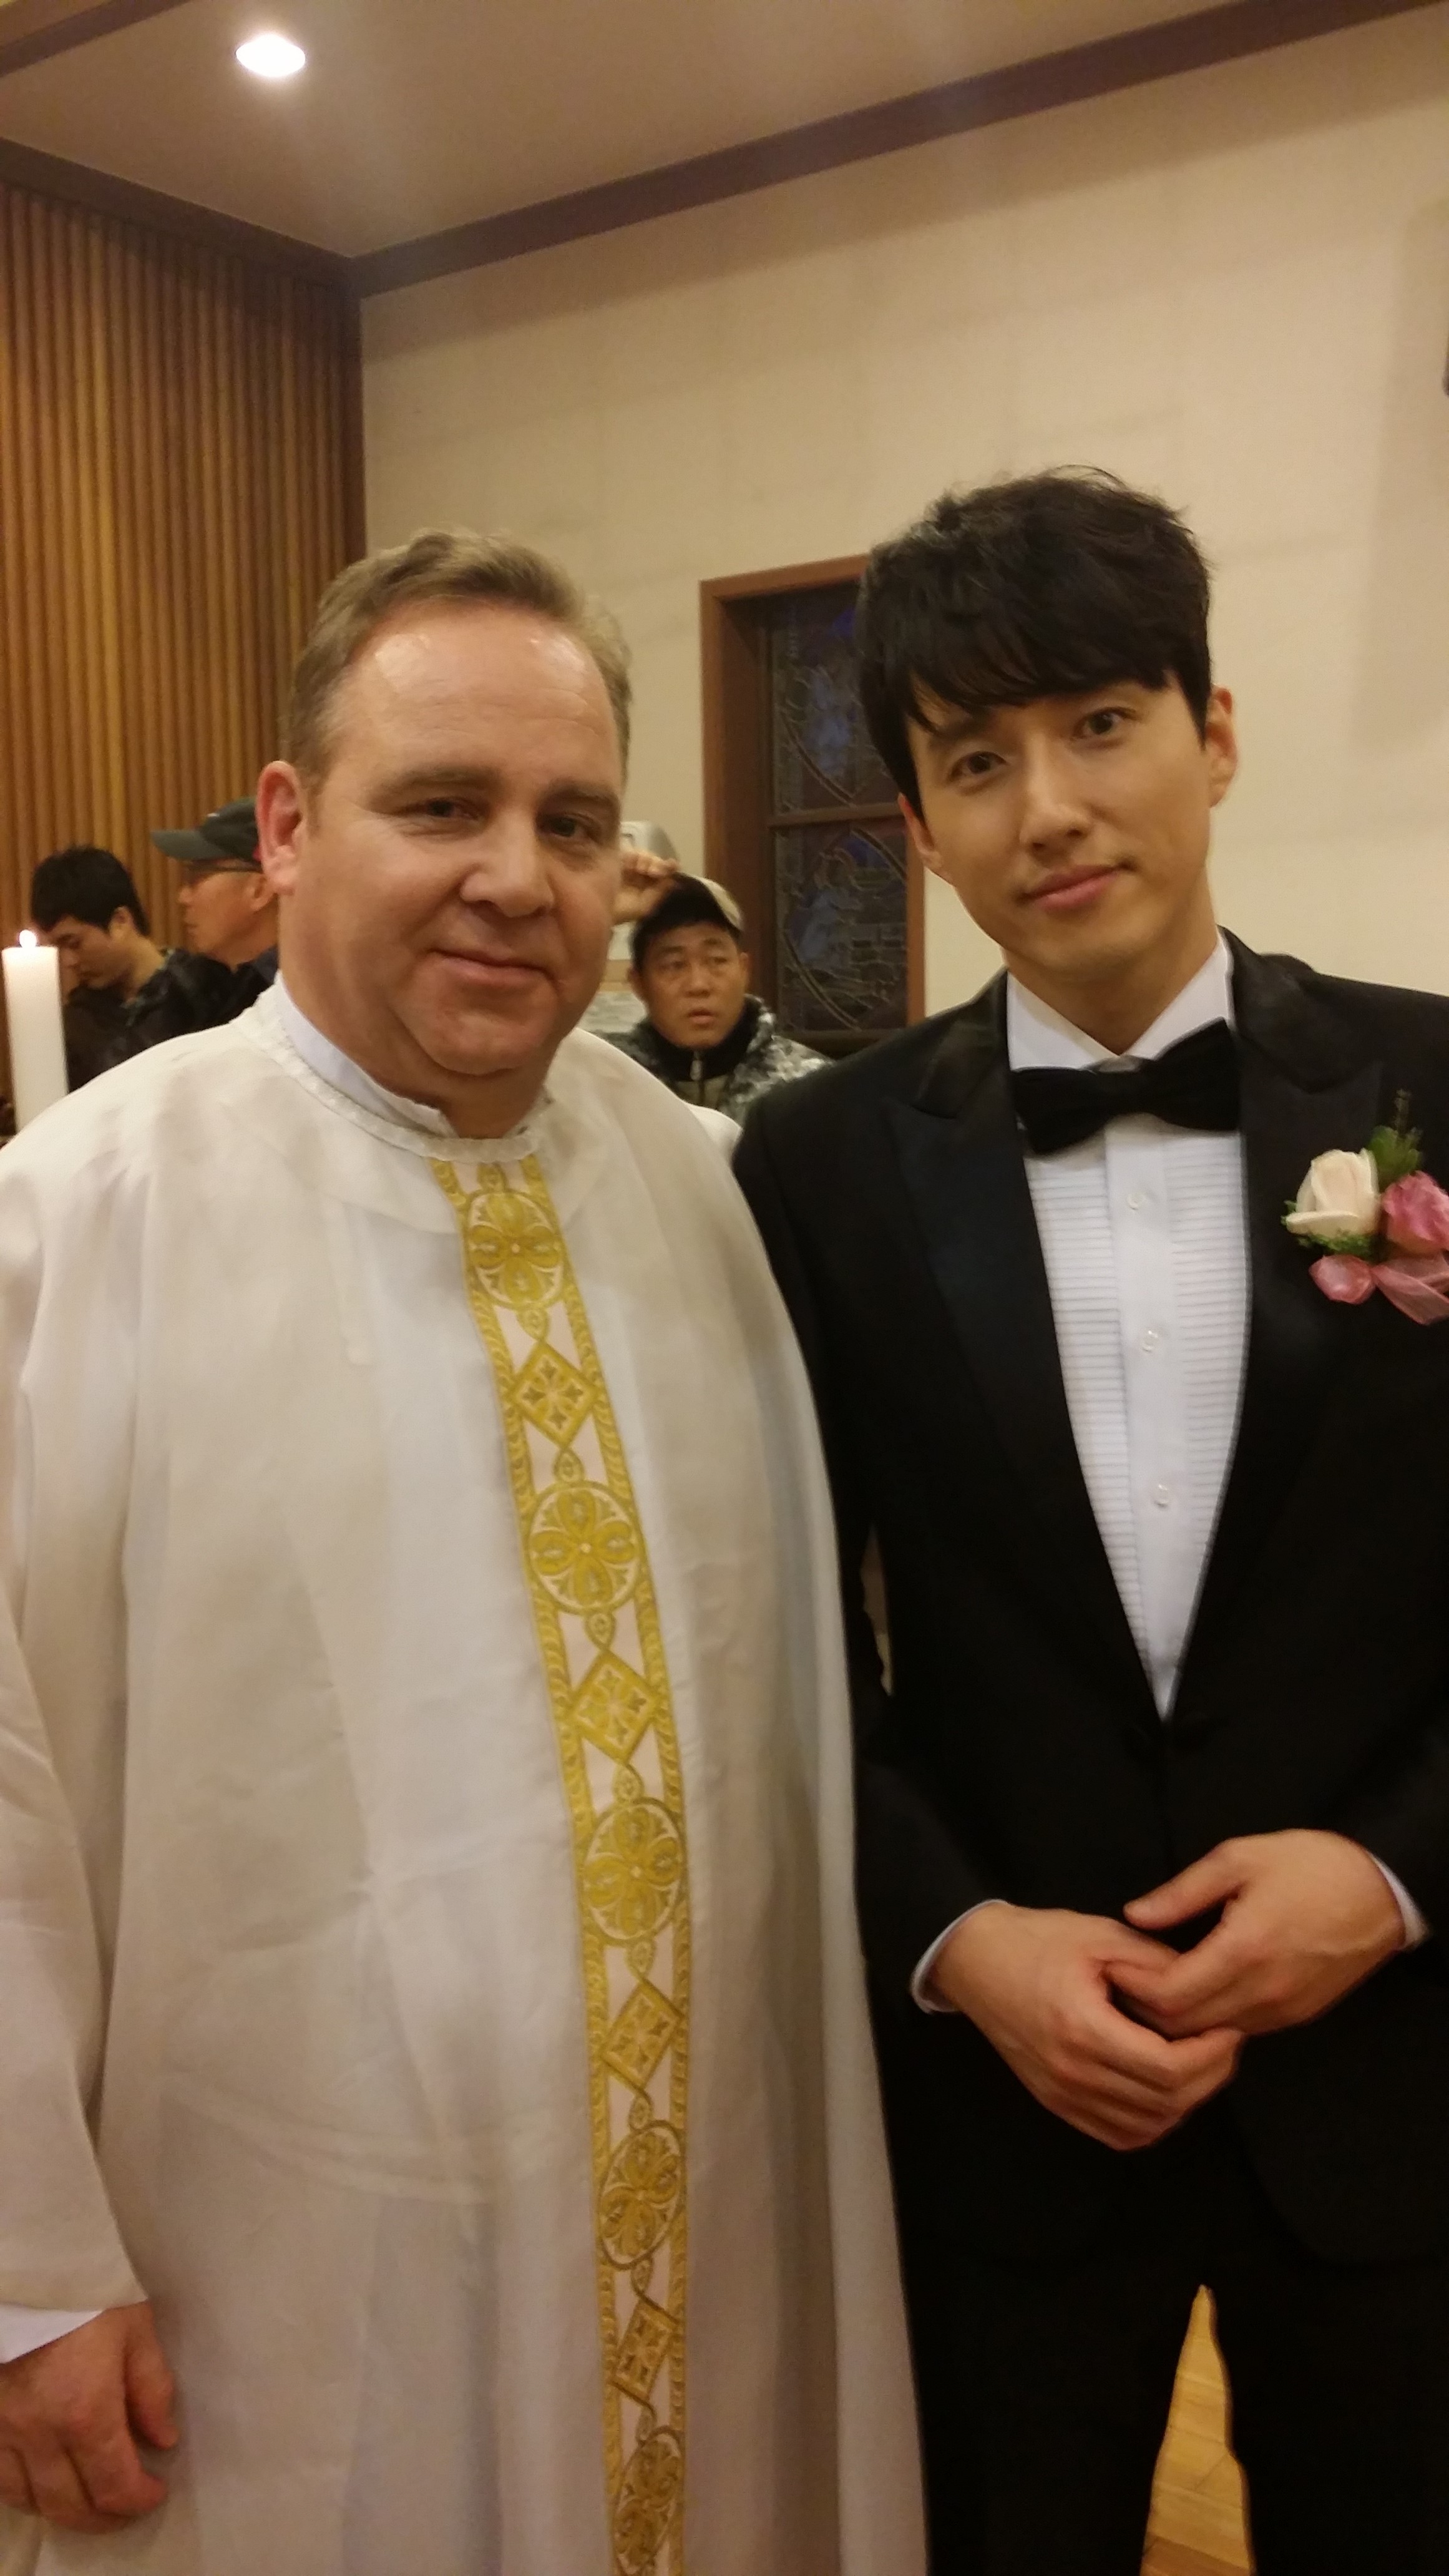 Dean Dawson is the priest with Jin-woo Jang as Philip Choi on location for the drama, Sweet Secrets on KBS television.